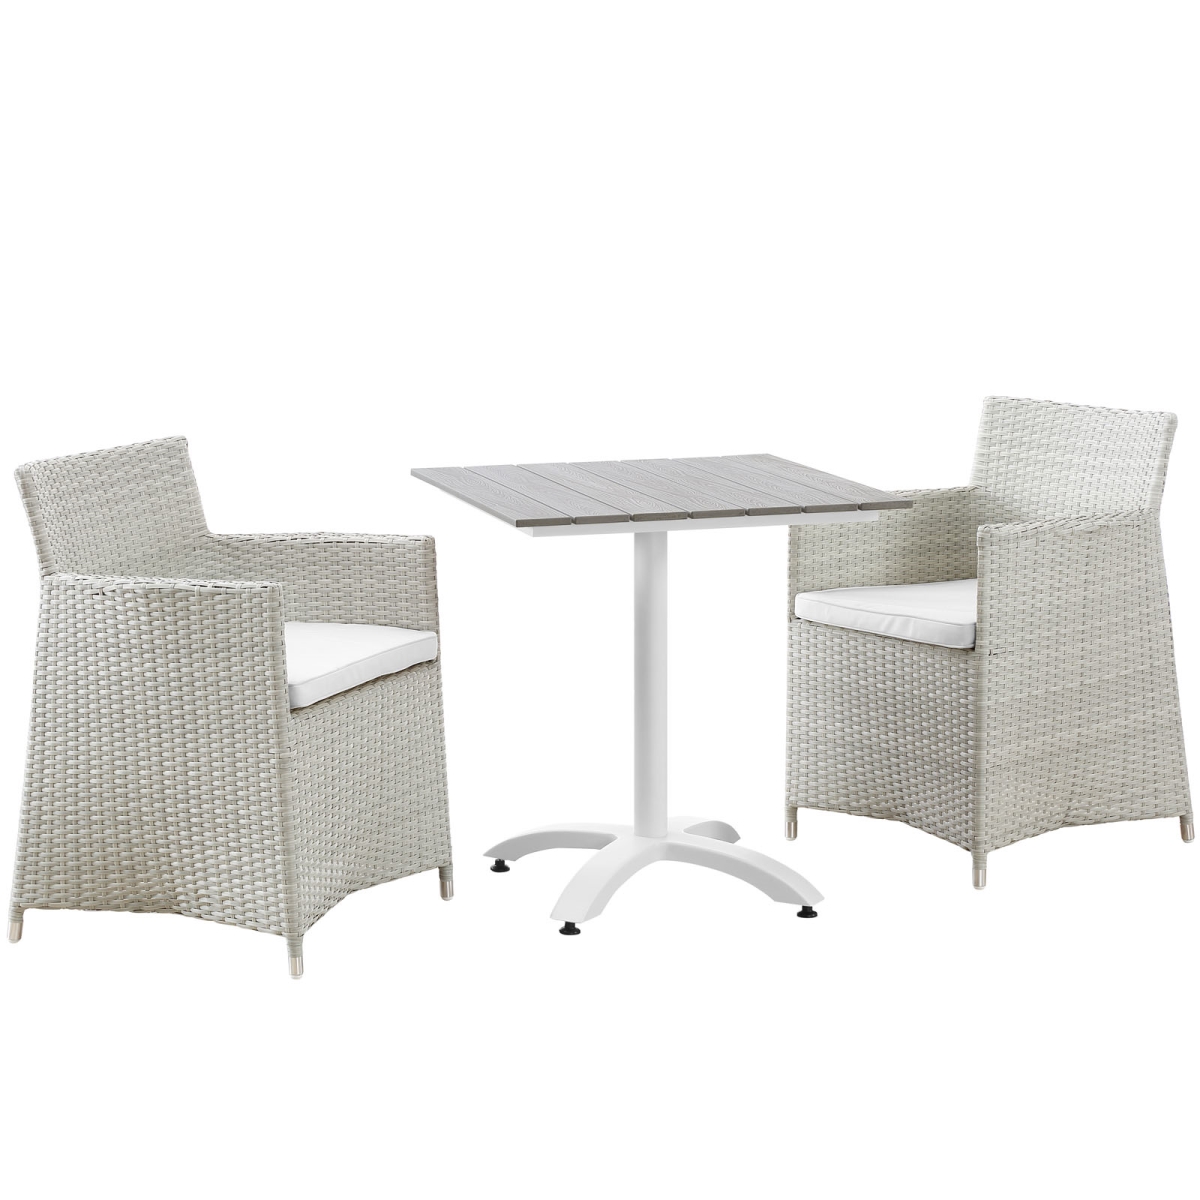 Eastend Eei-1758-gry-whi-set 3 Piece Junction Outdoor Patio Dining Set, White Poly Rattan